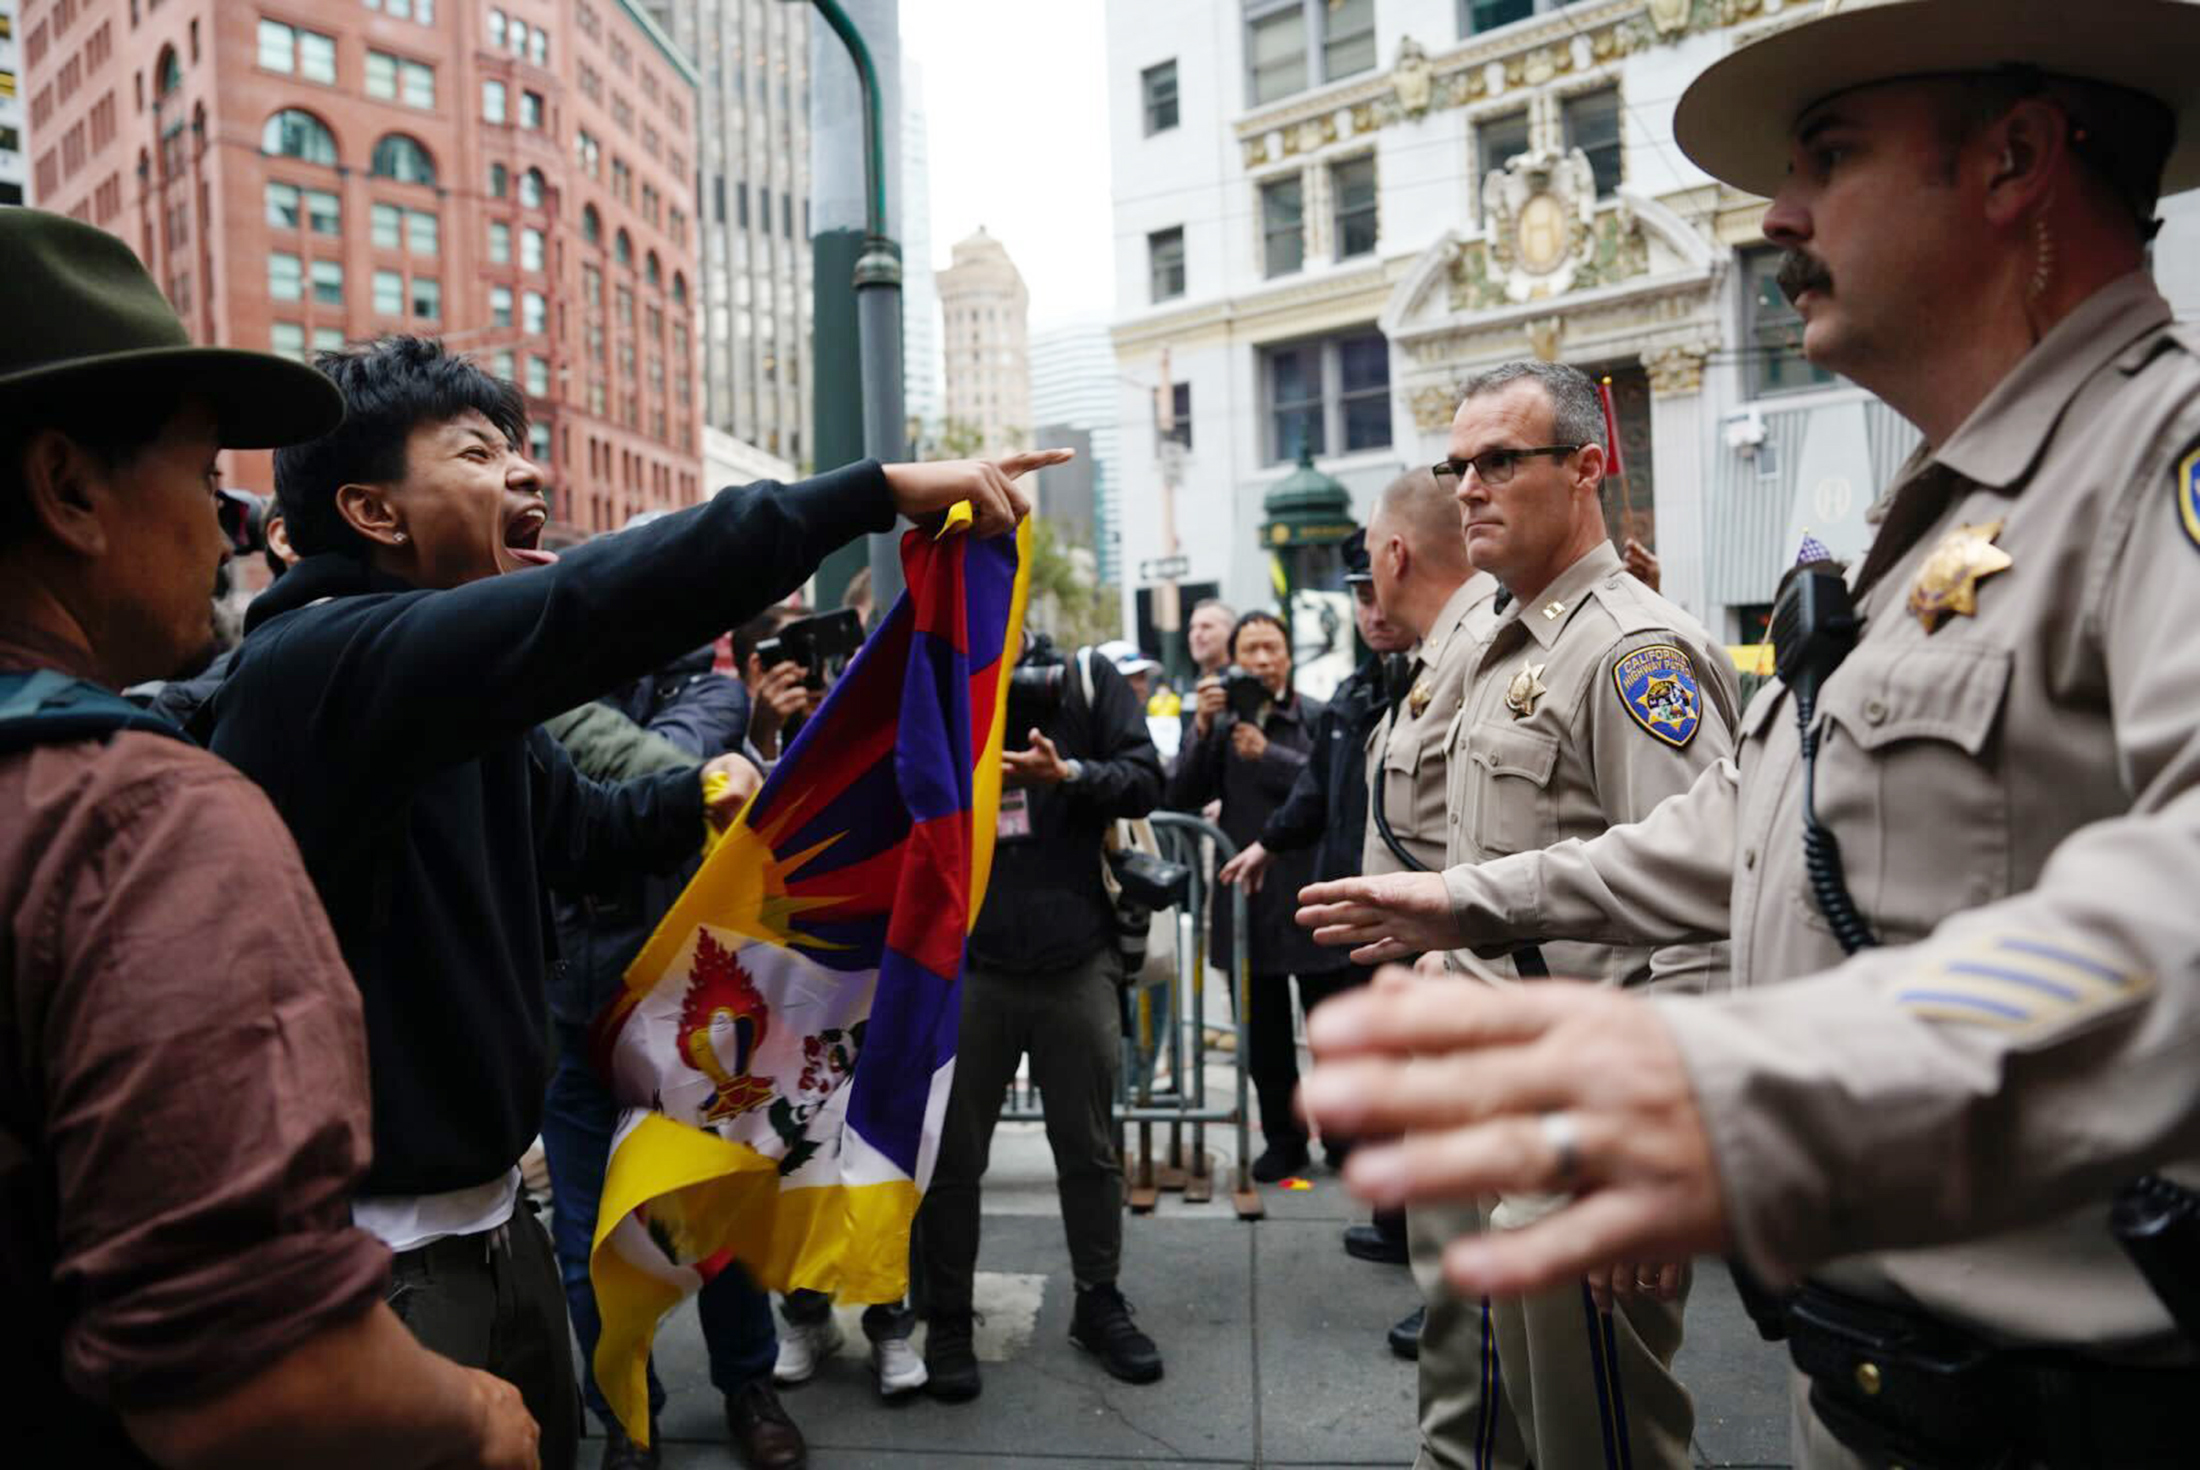 A pro-Tibetan protester screams and points in the direction of California Highways Patrol during a demonstration